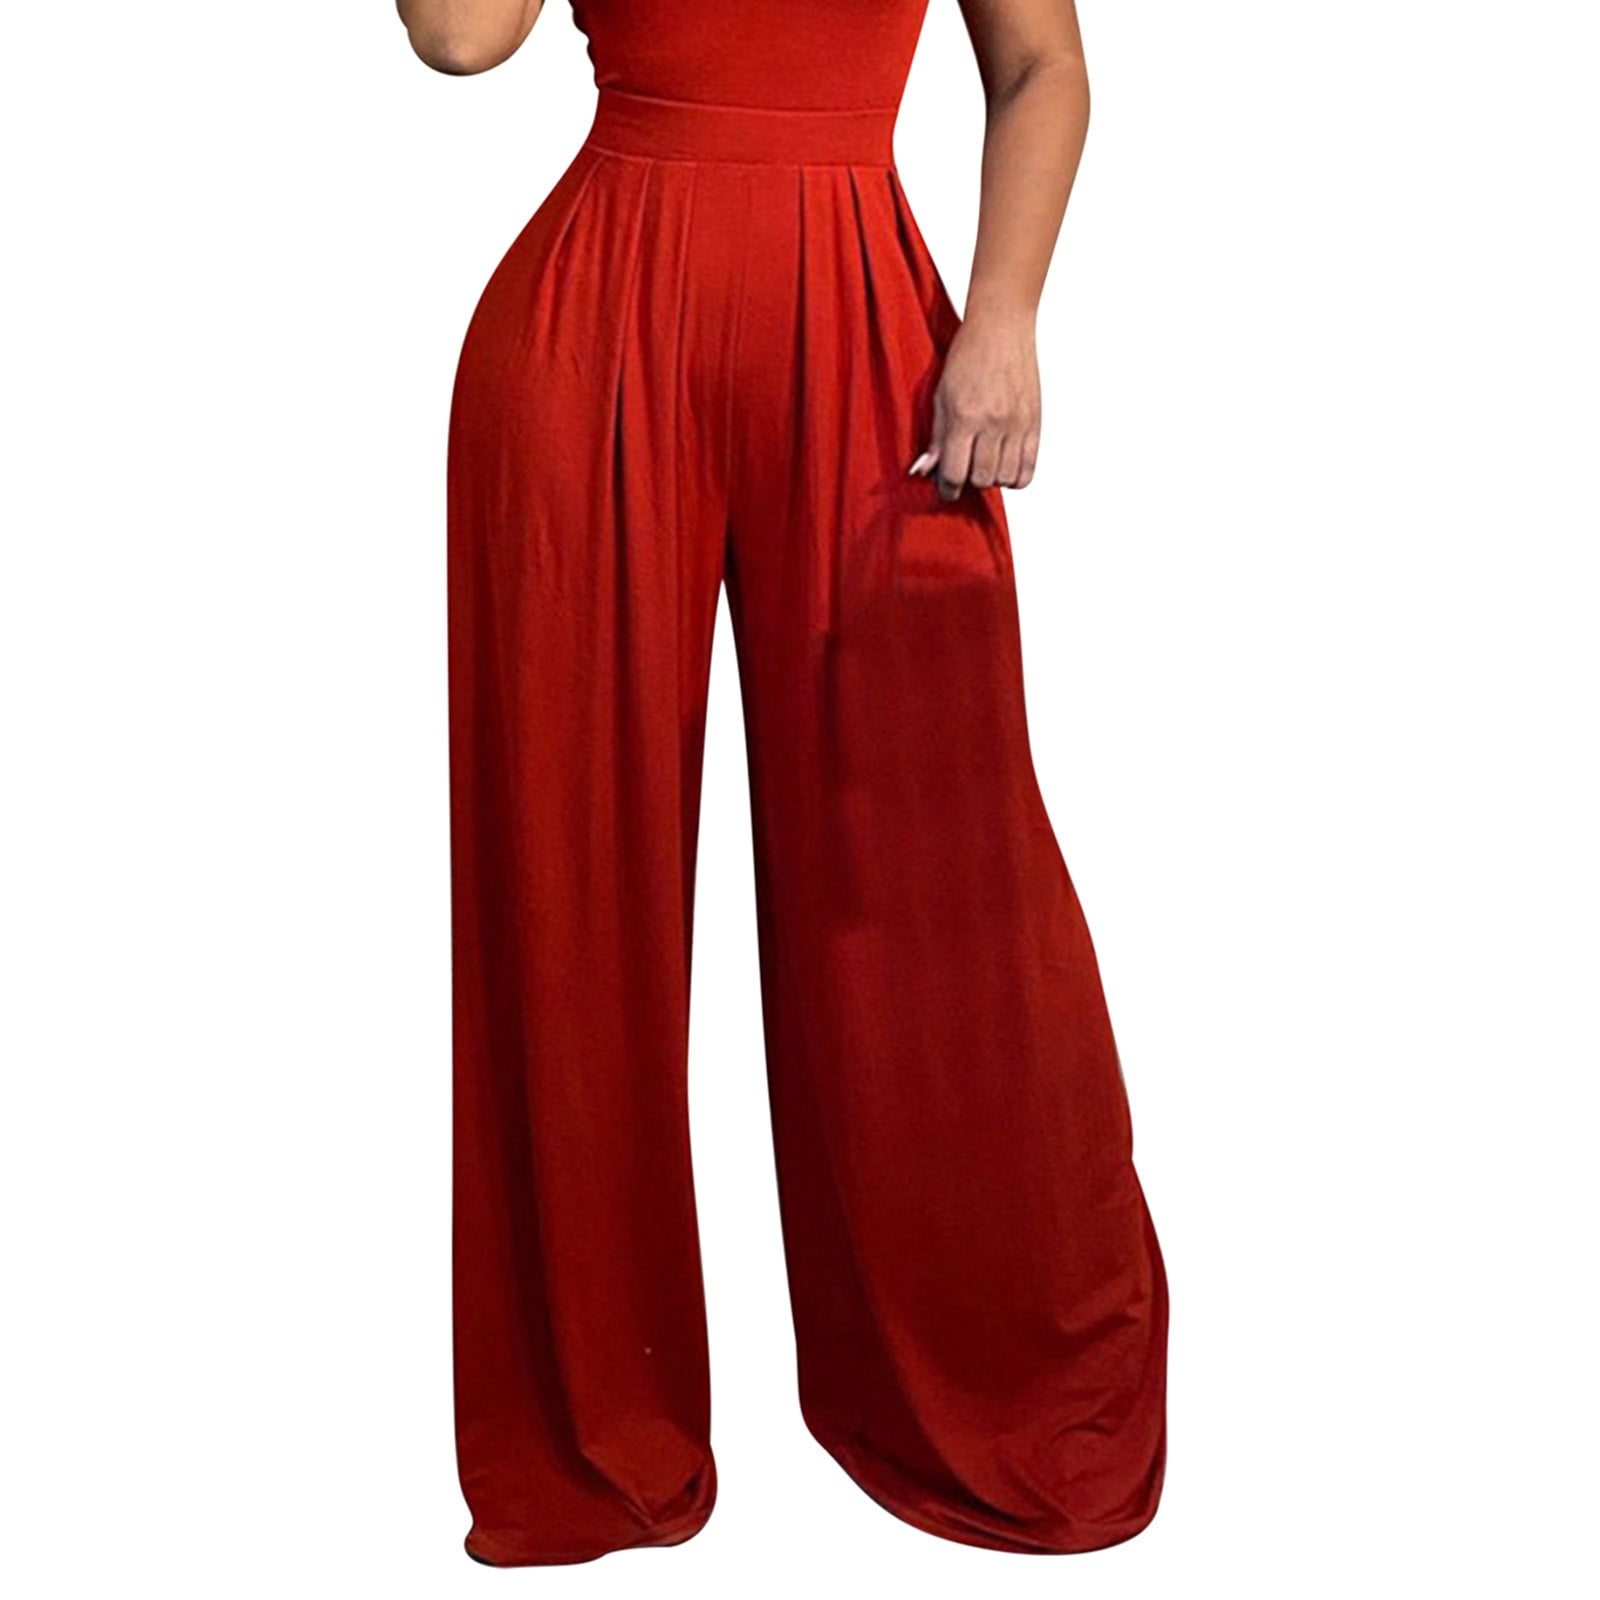 Wide Leg Palazzo Pants for Women Casual Stretchy High Waisted Palazzo ...